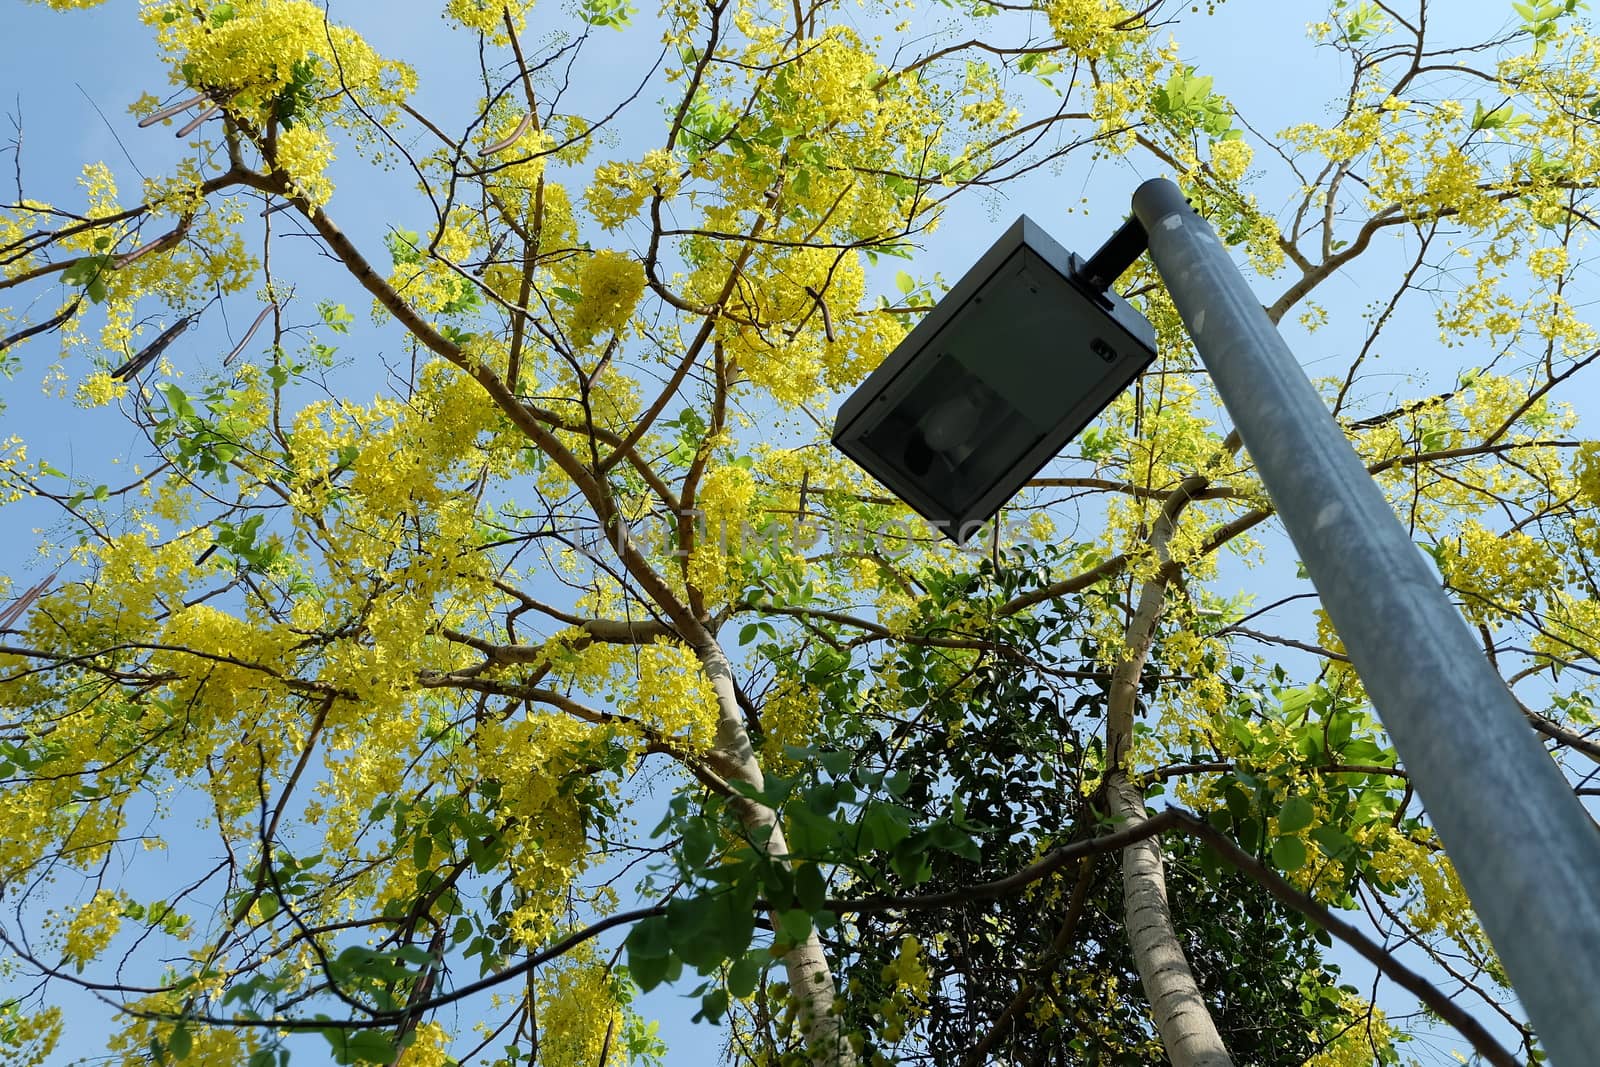 Street Lamp with Golden Shower Flower Tree Background. by mesamong